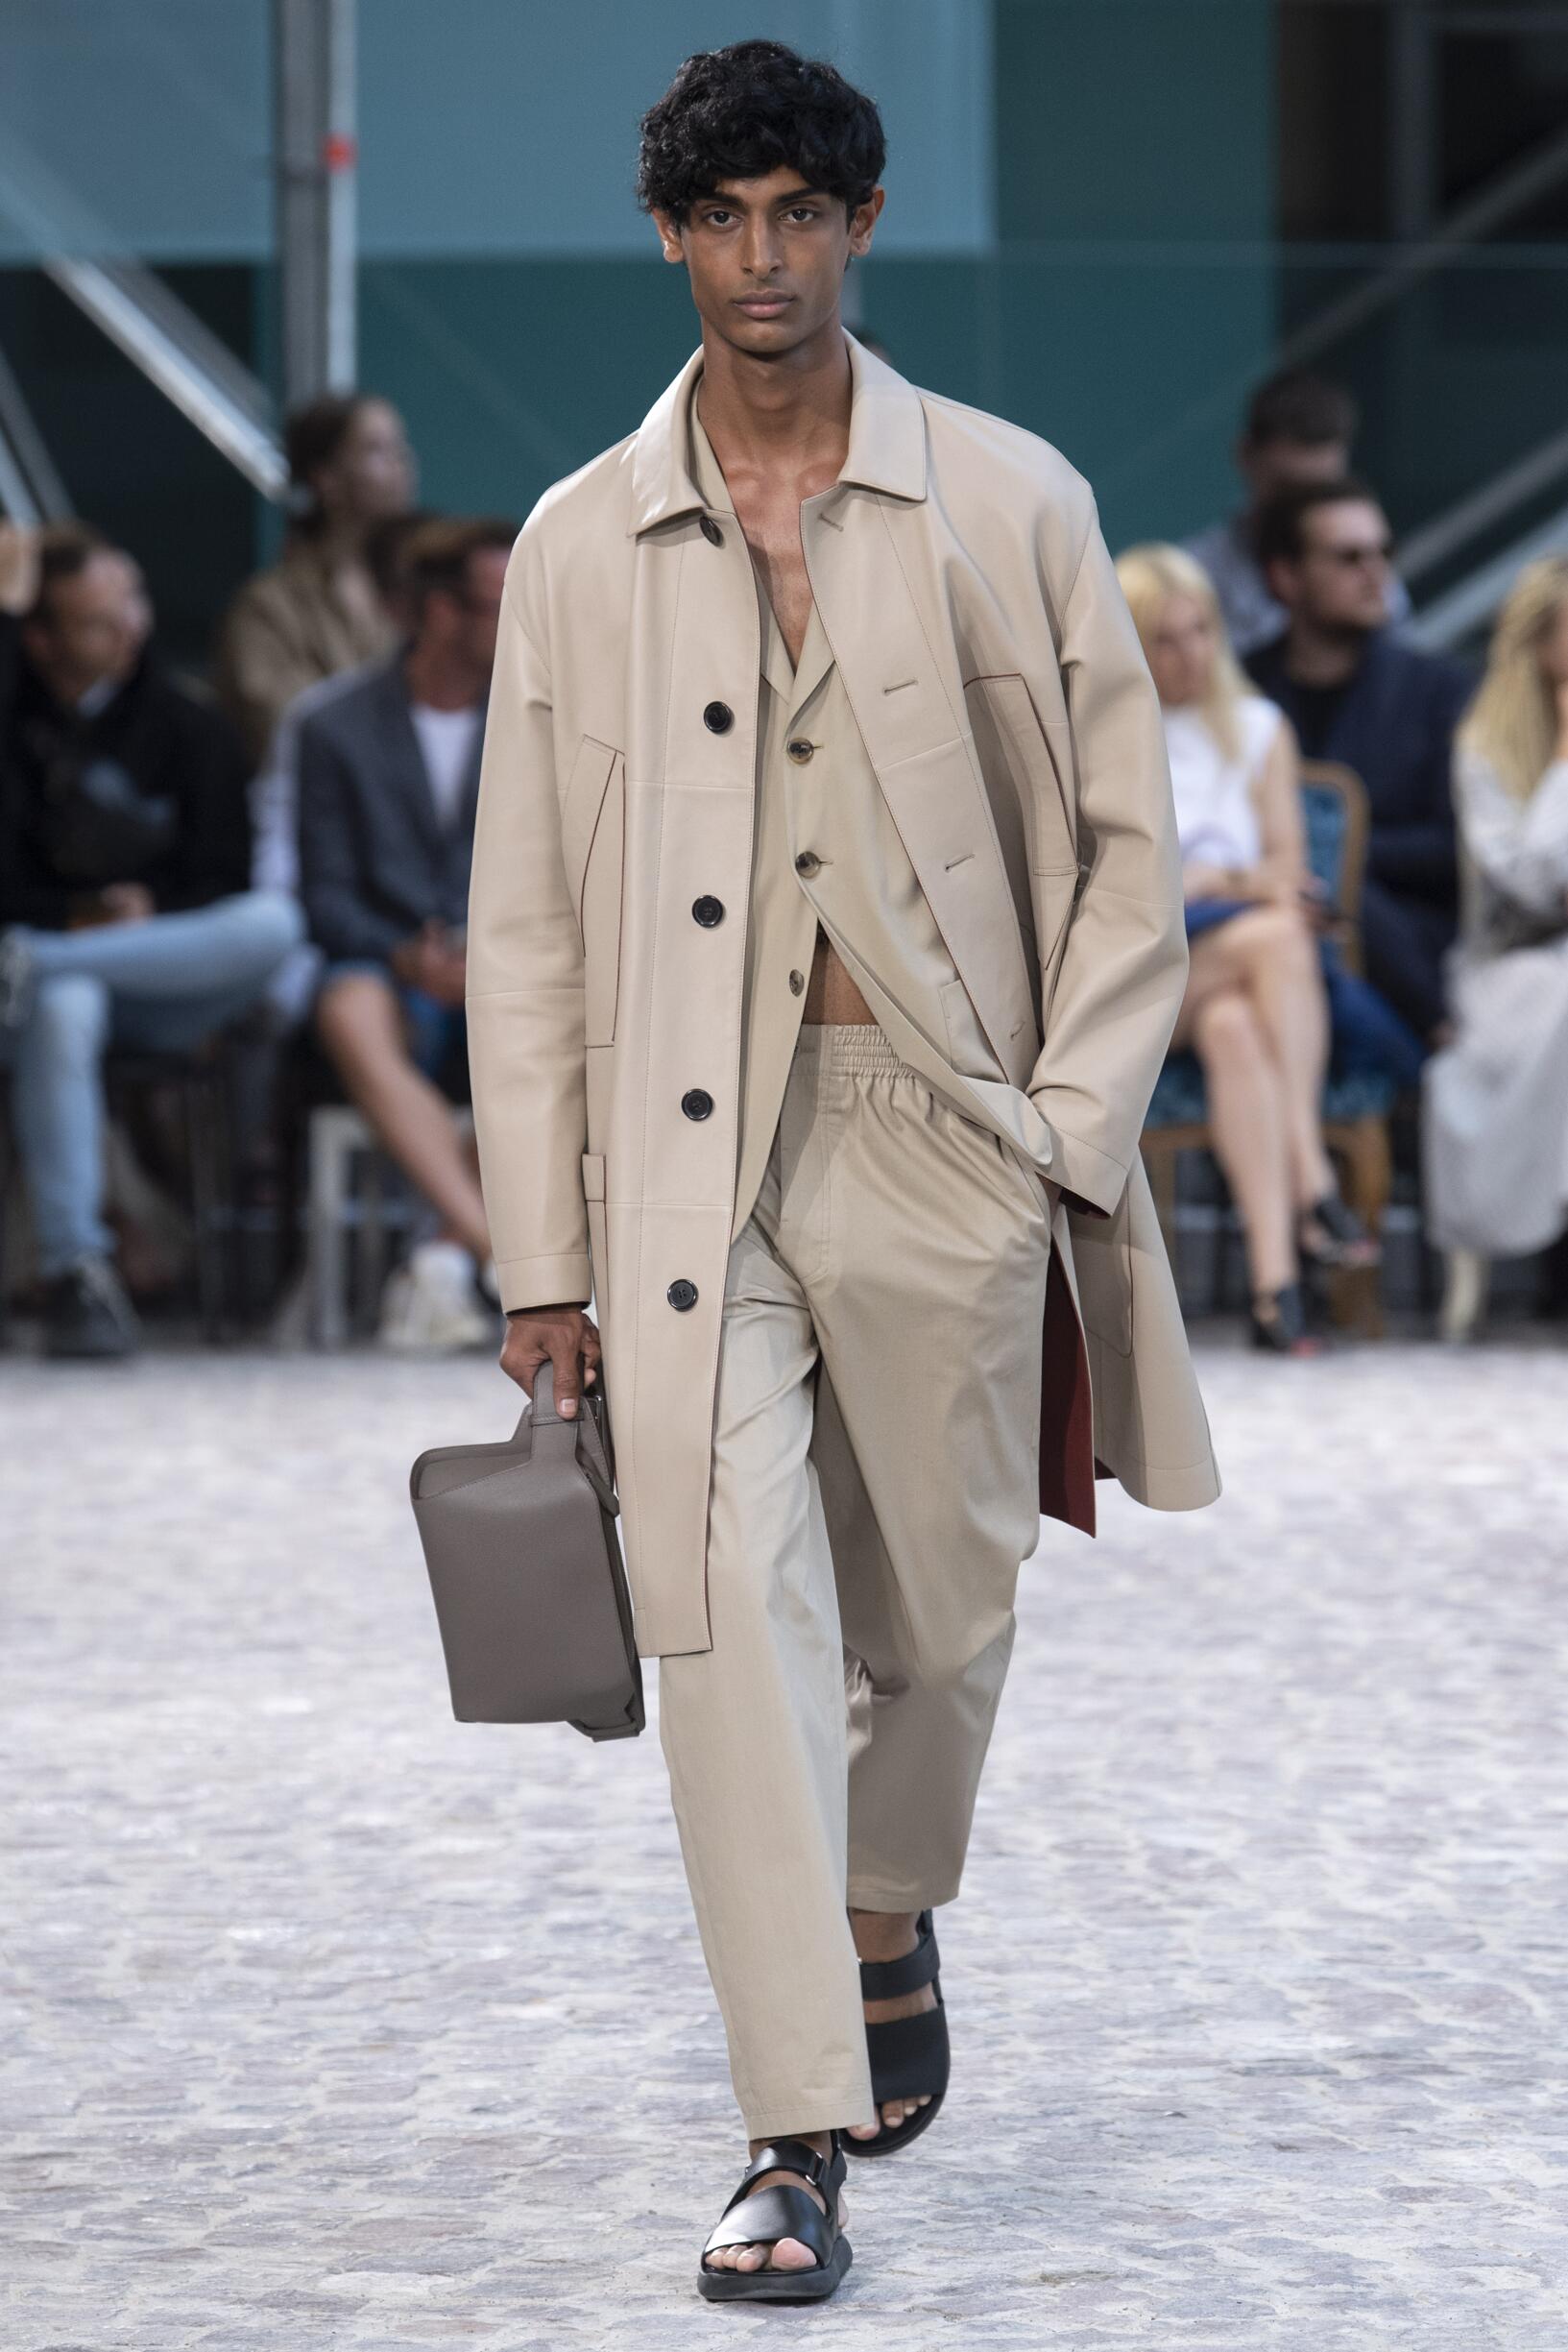 HERMÃˆS SPRING SUMMER 2020 MENâ€™S COLLECTION | The Skinny Beep